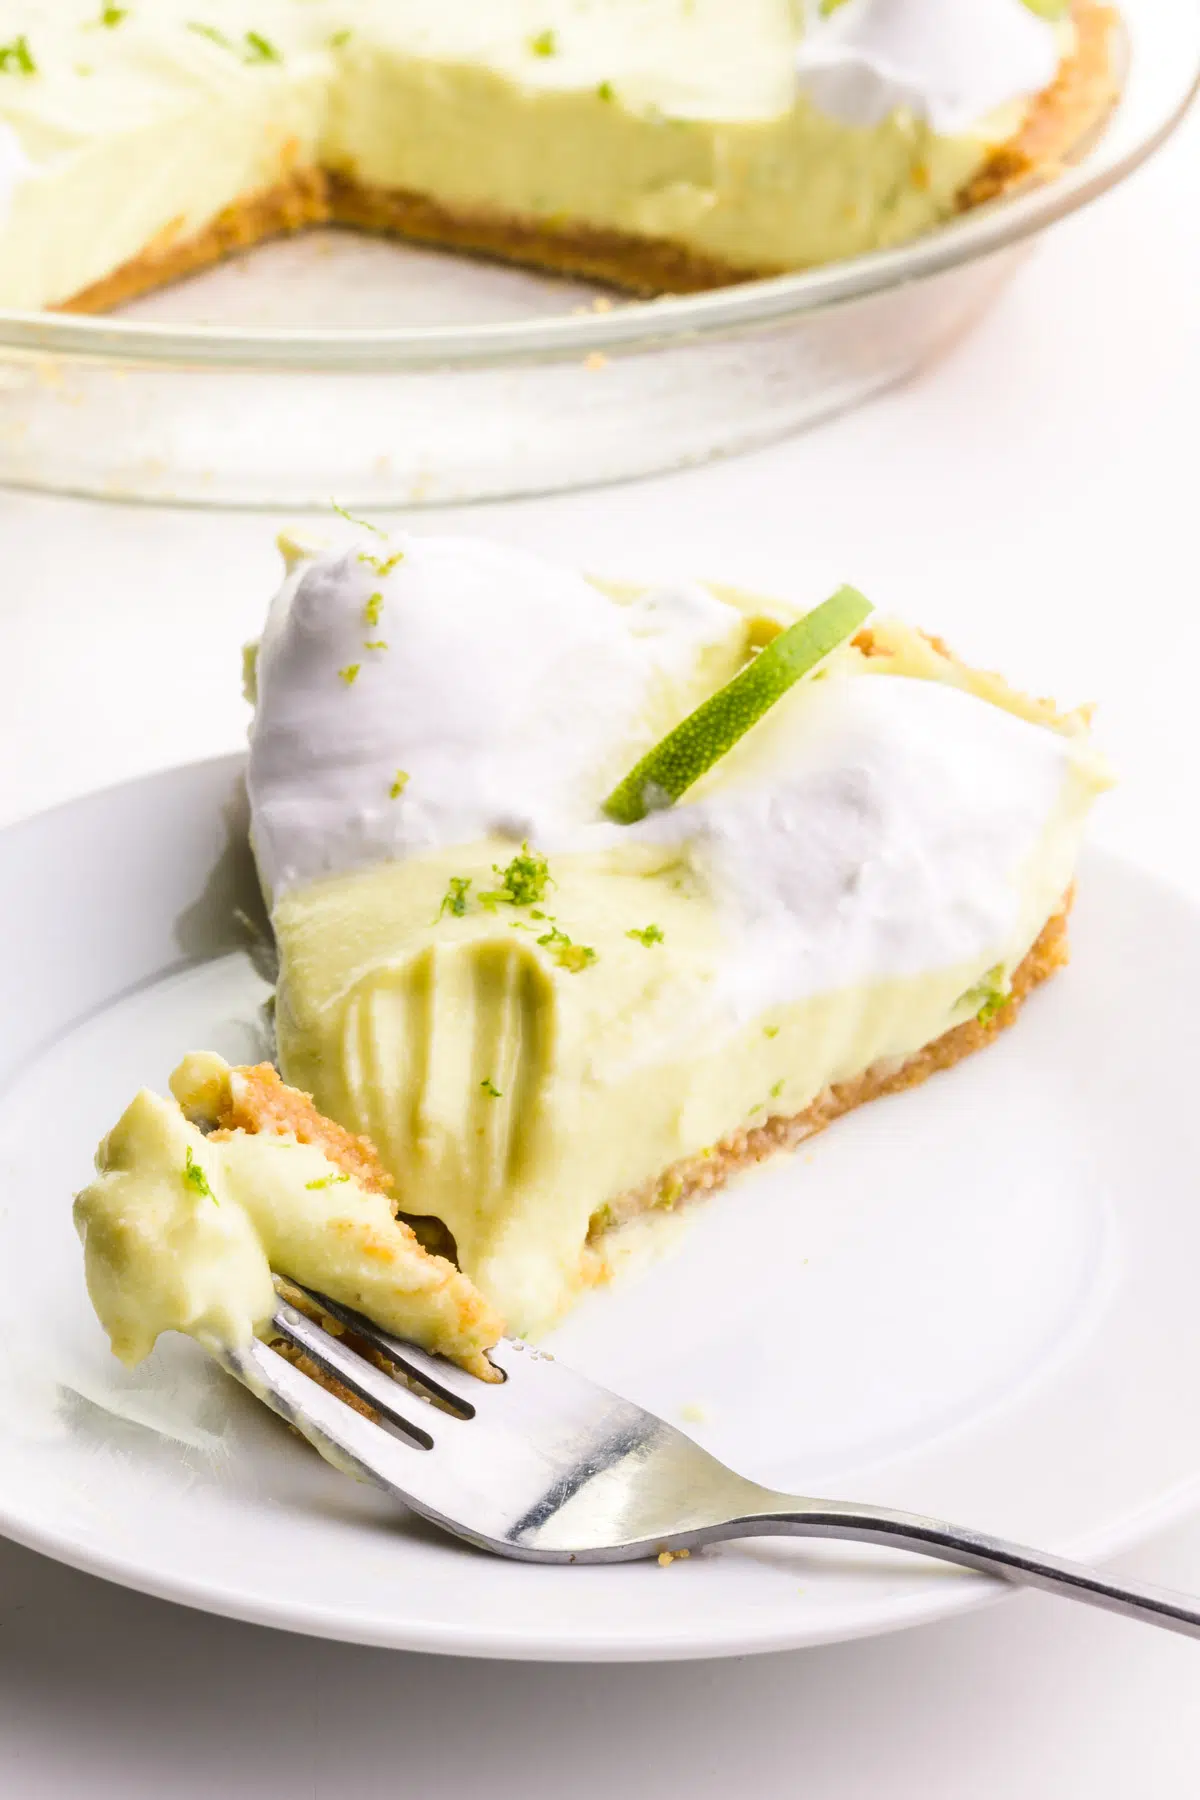 A slice of key lime pie sits on a plate with a fork in front of it with some of the pie on it. The rest of the pie is in the background.